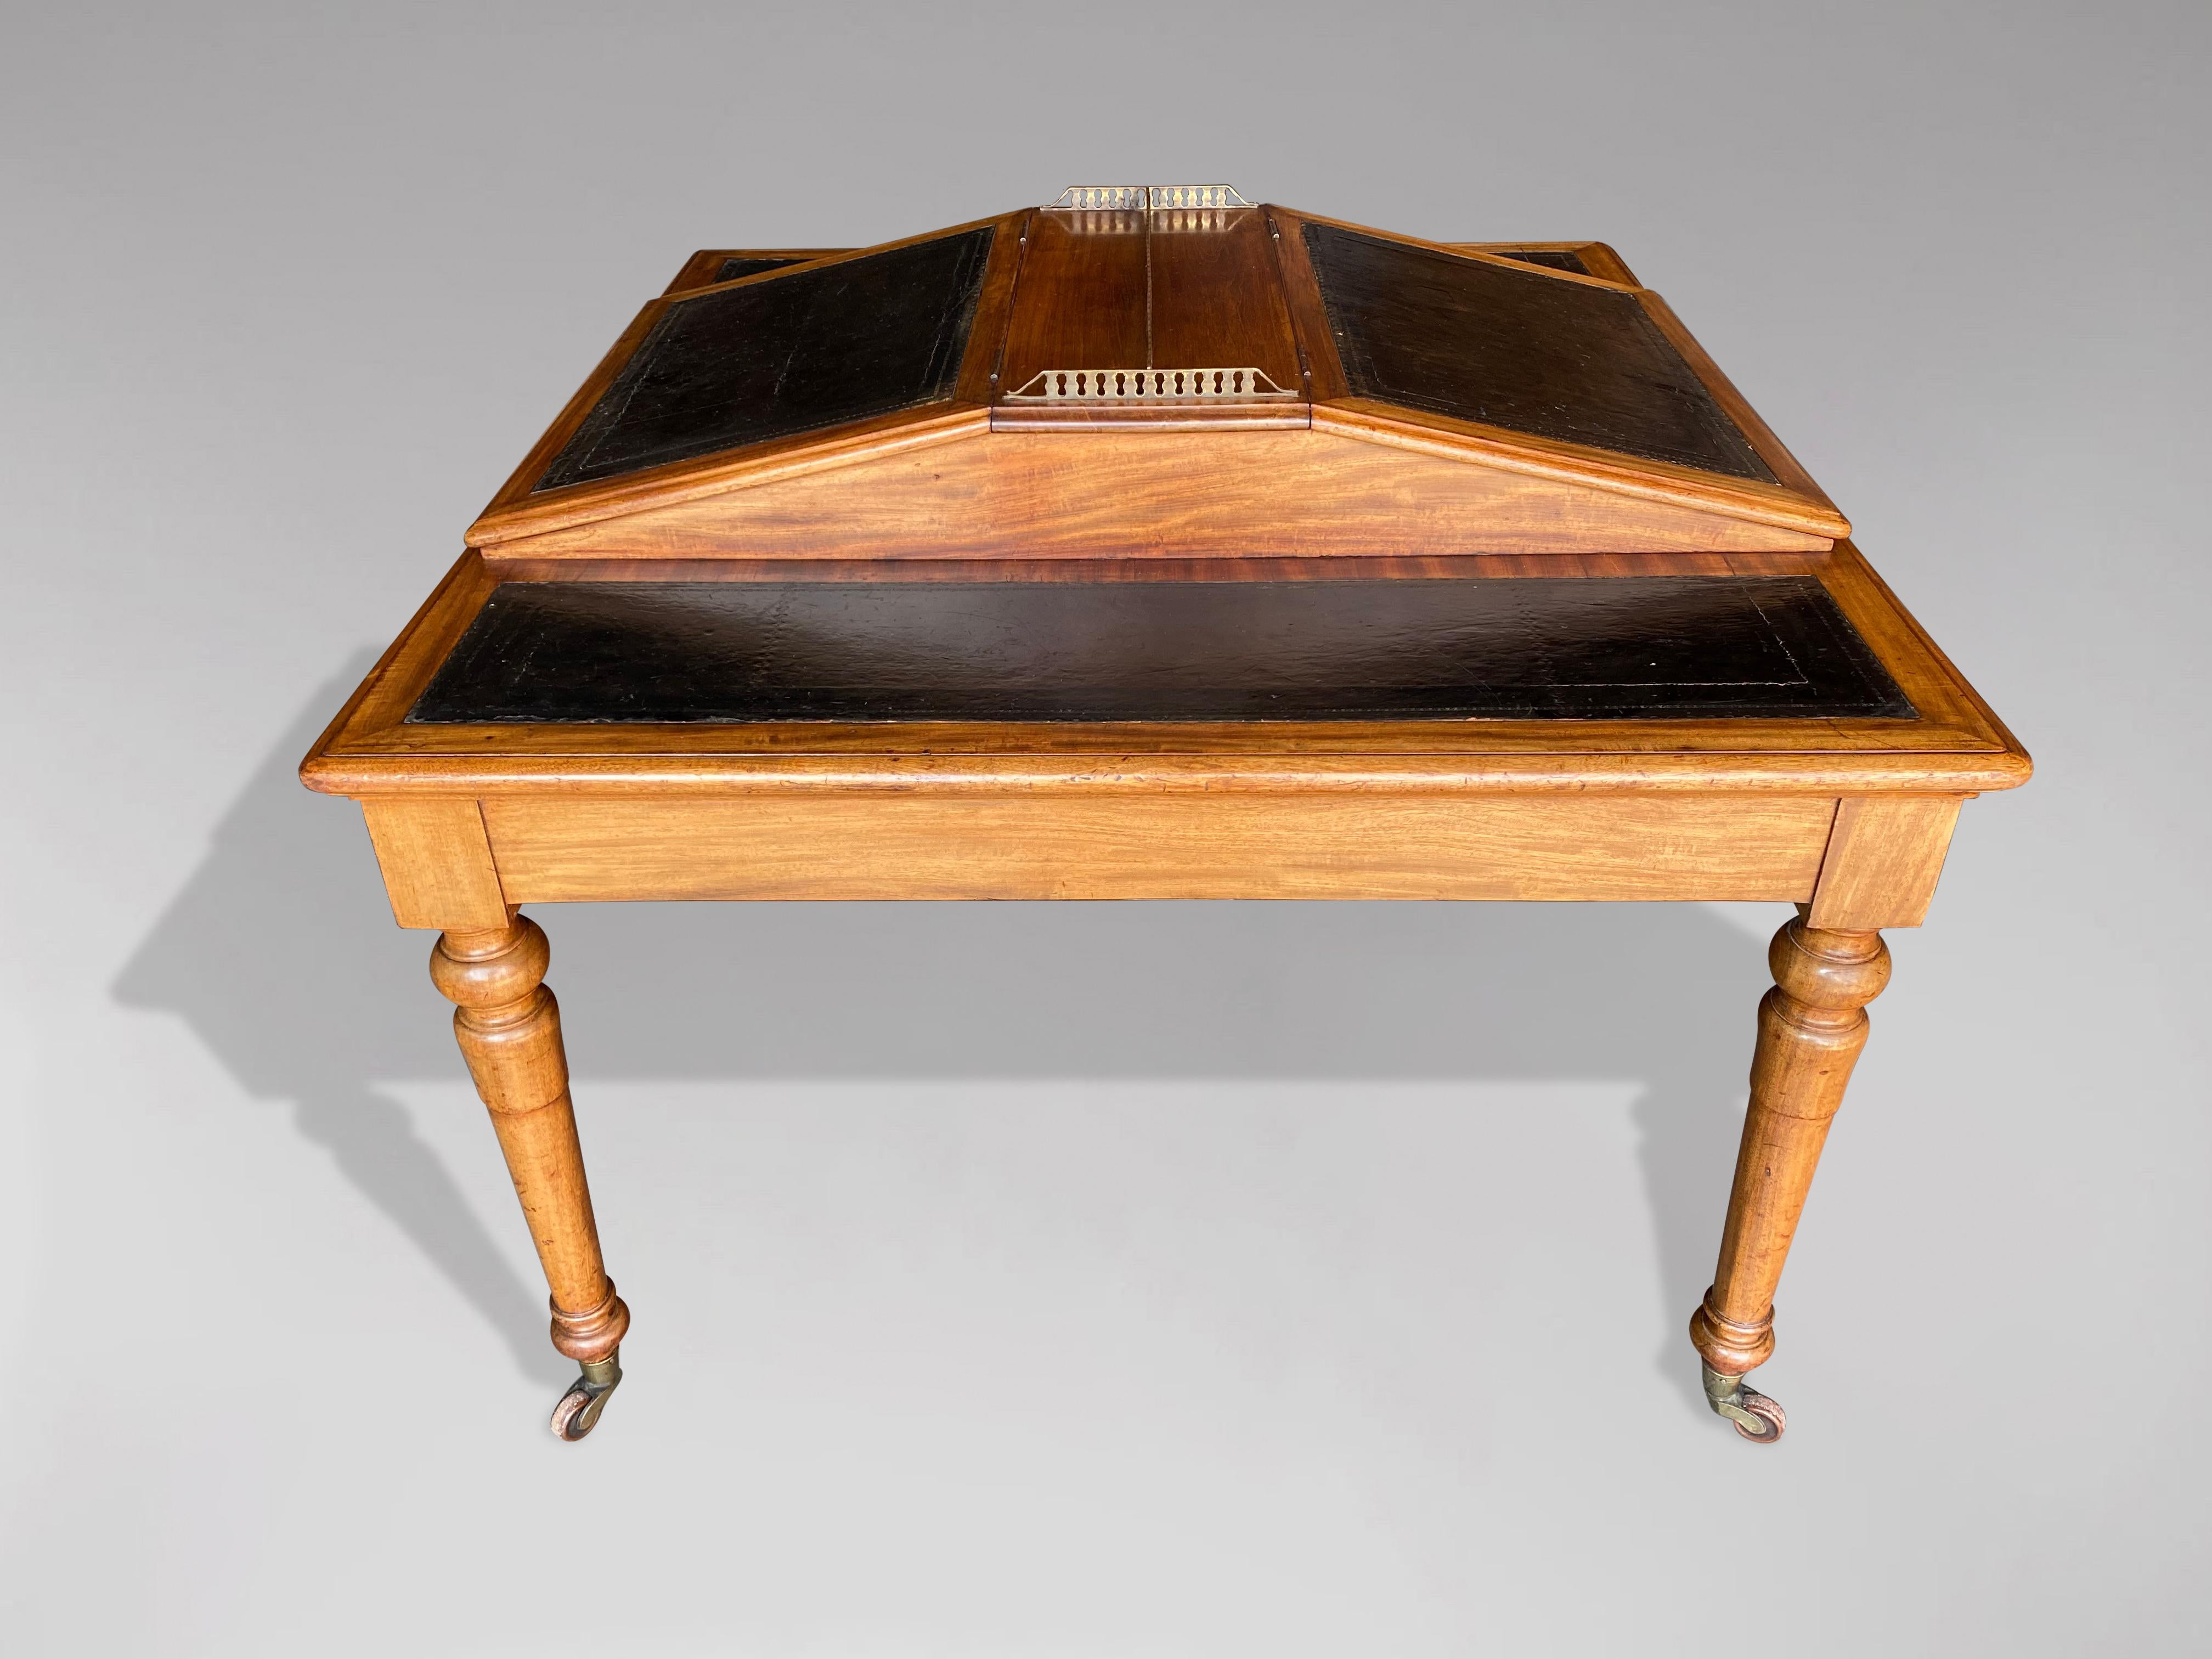 19th Century Victorian Period Partner's Writing Table In Good Condition For Sale In Petworth,West Sussex, GB